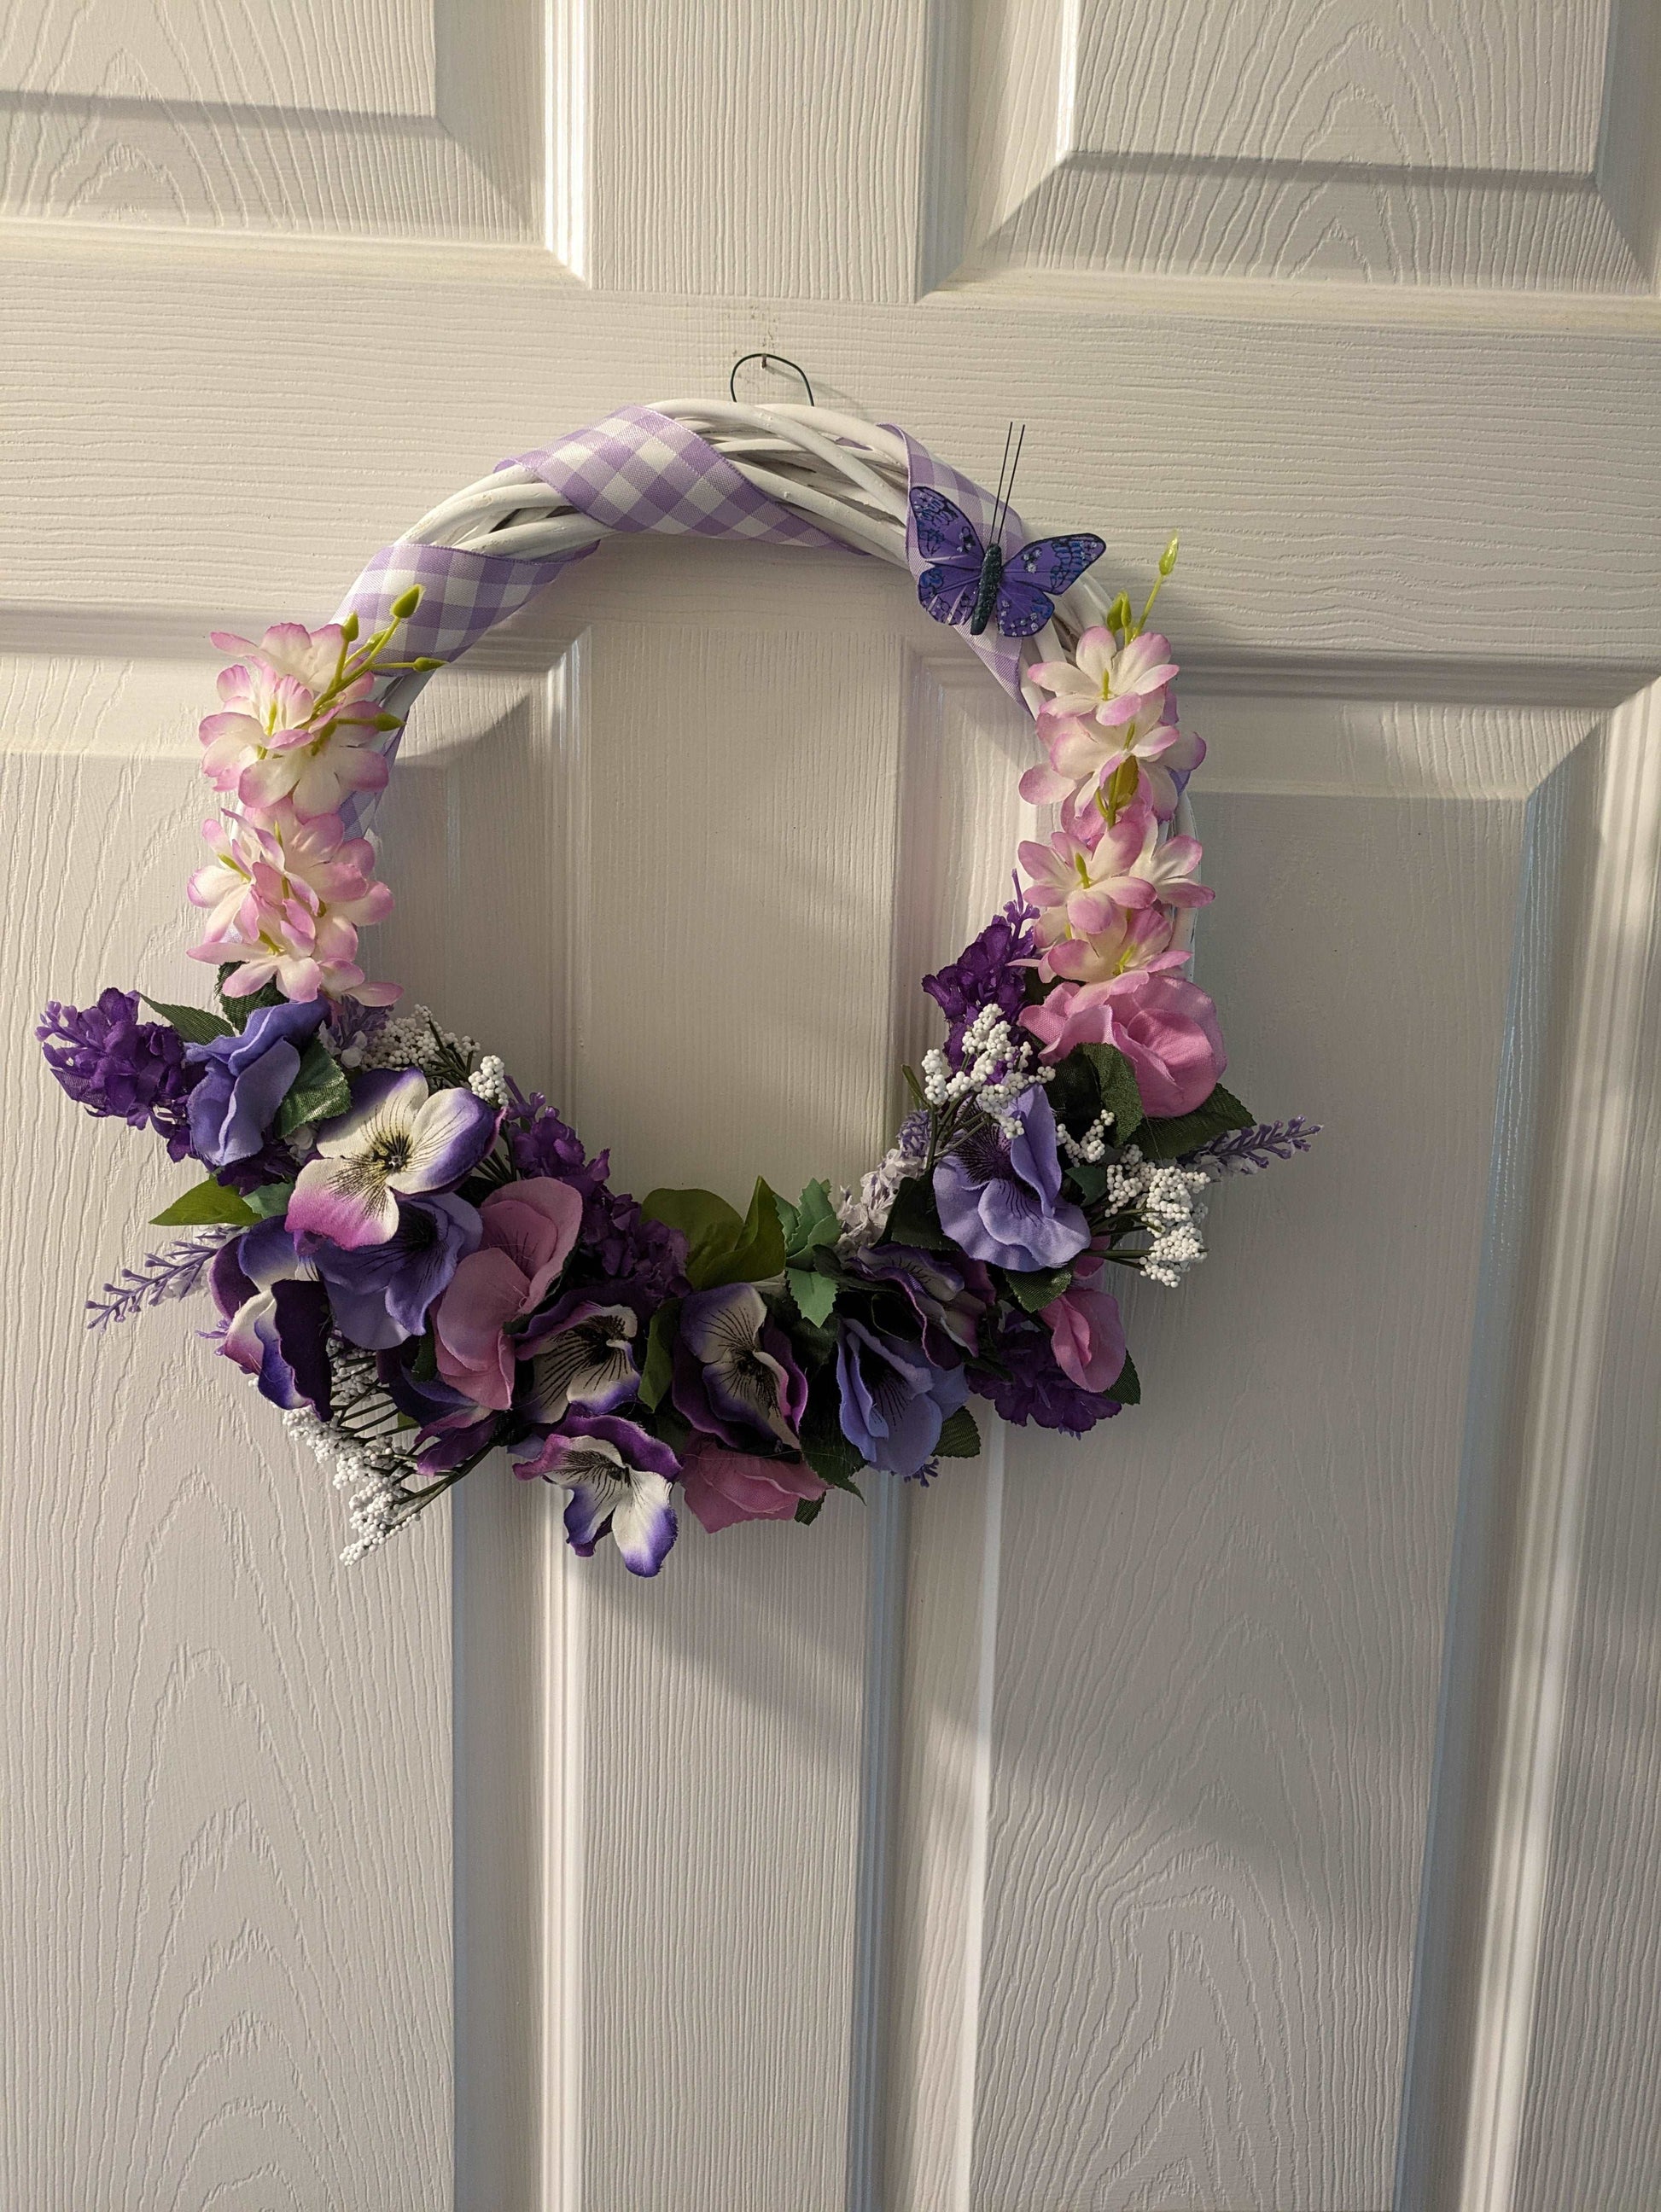 12" white willow Floral wreath